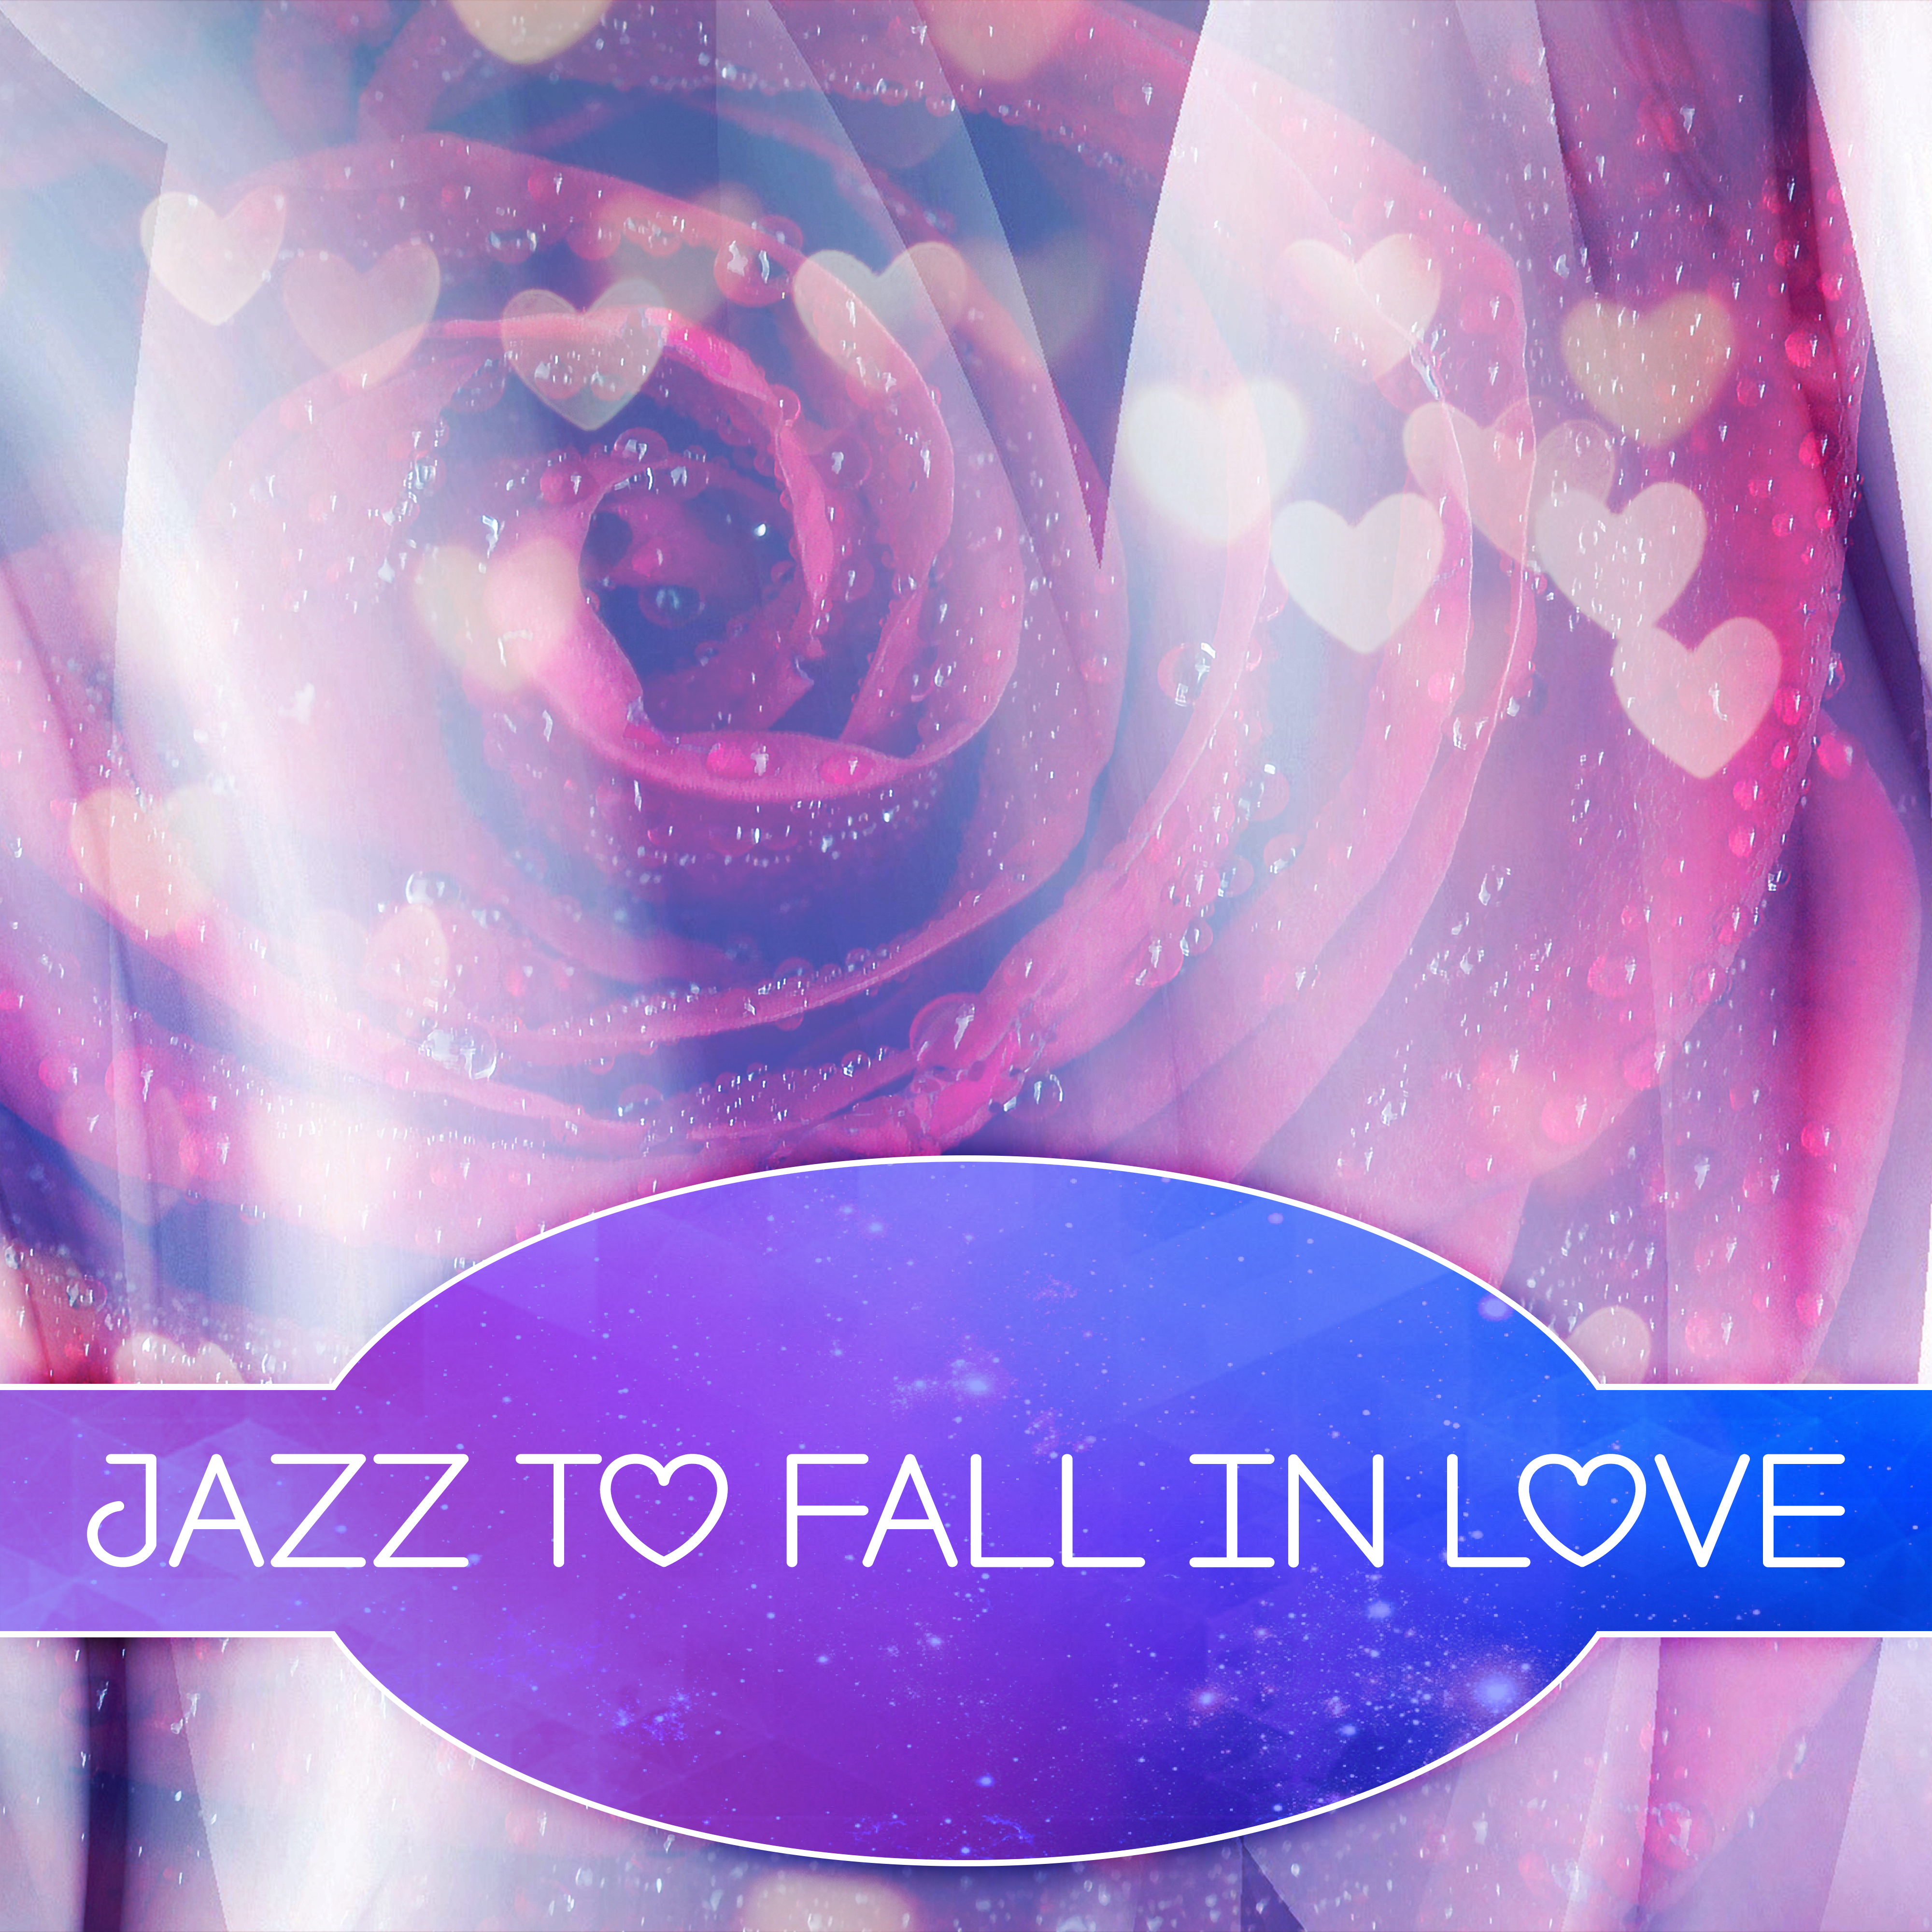 Jazz to Fall in Love – Romantic Jazz Music, Shades of Jazz, Easy Listening, Piano Music, Love Music, Background Sounds